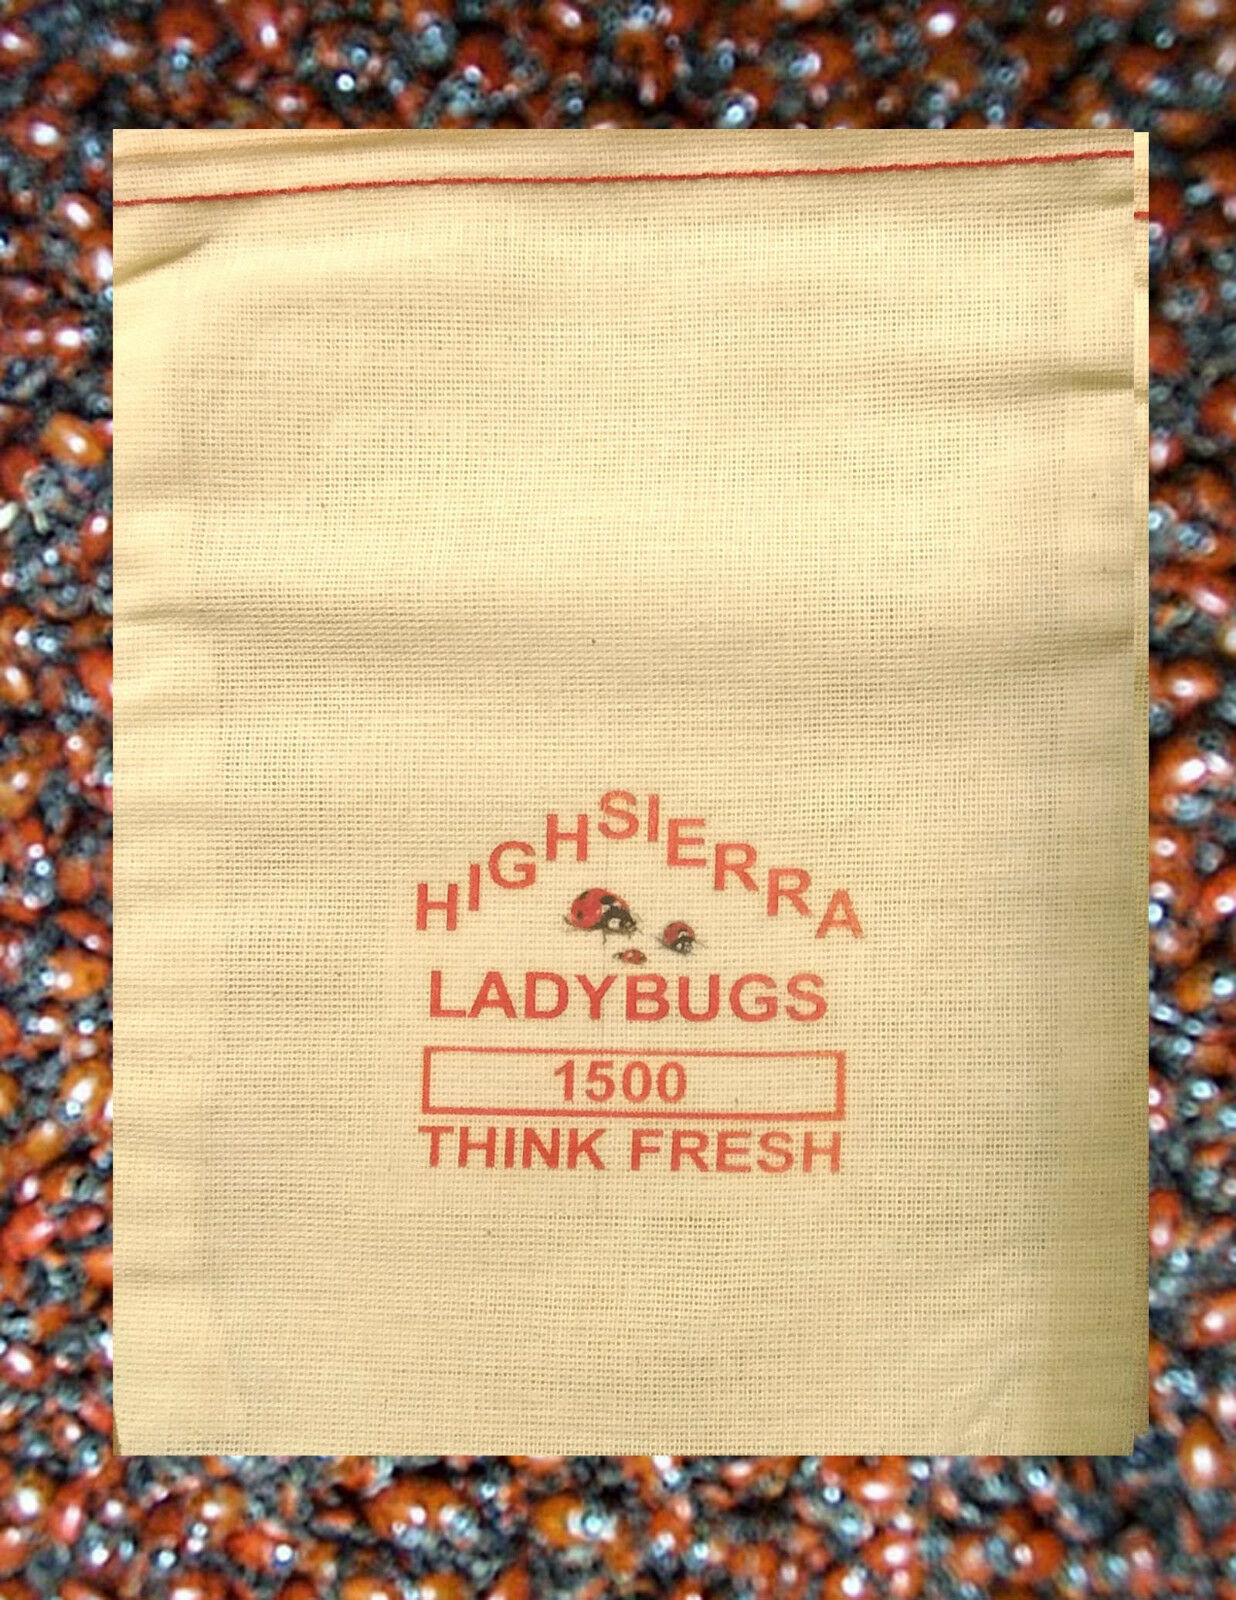 1500 Premium Fresh Live Ladybugs  Think Fresh!!  In Stock Now  Fast Shipping.